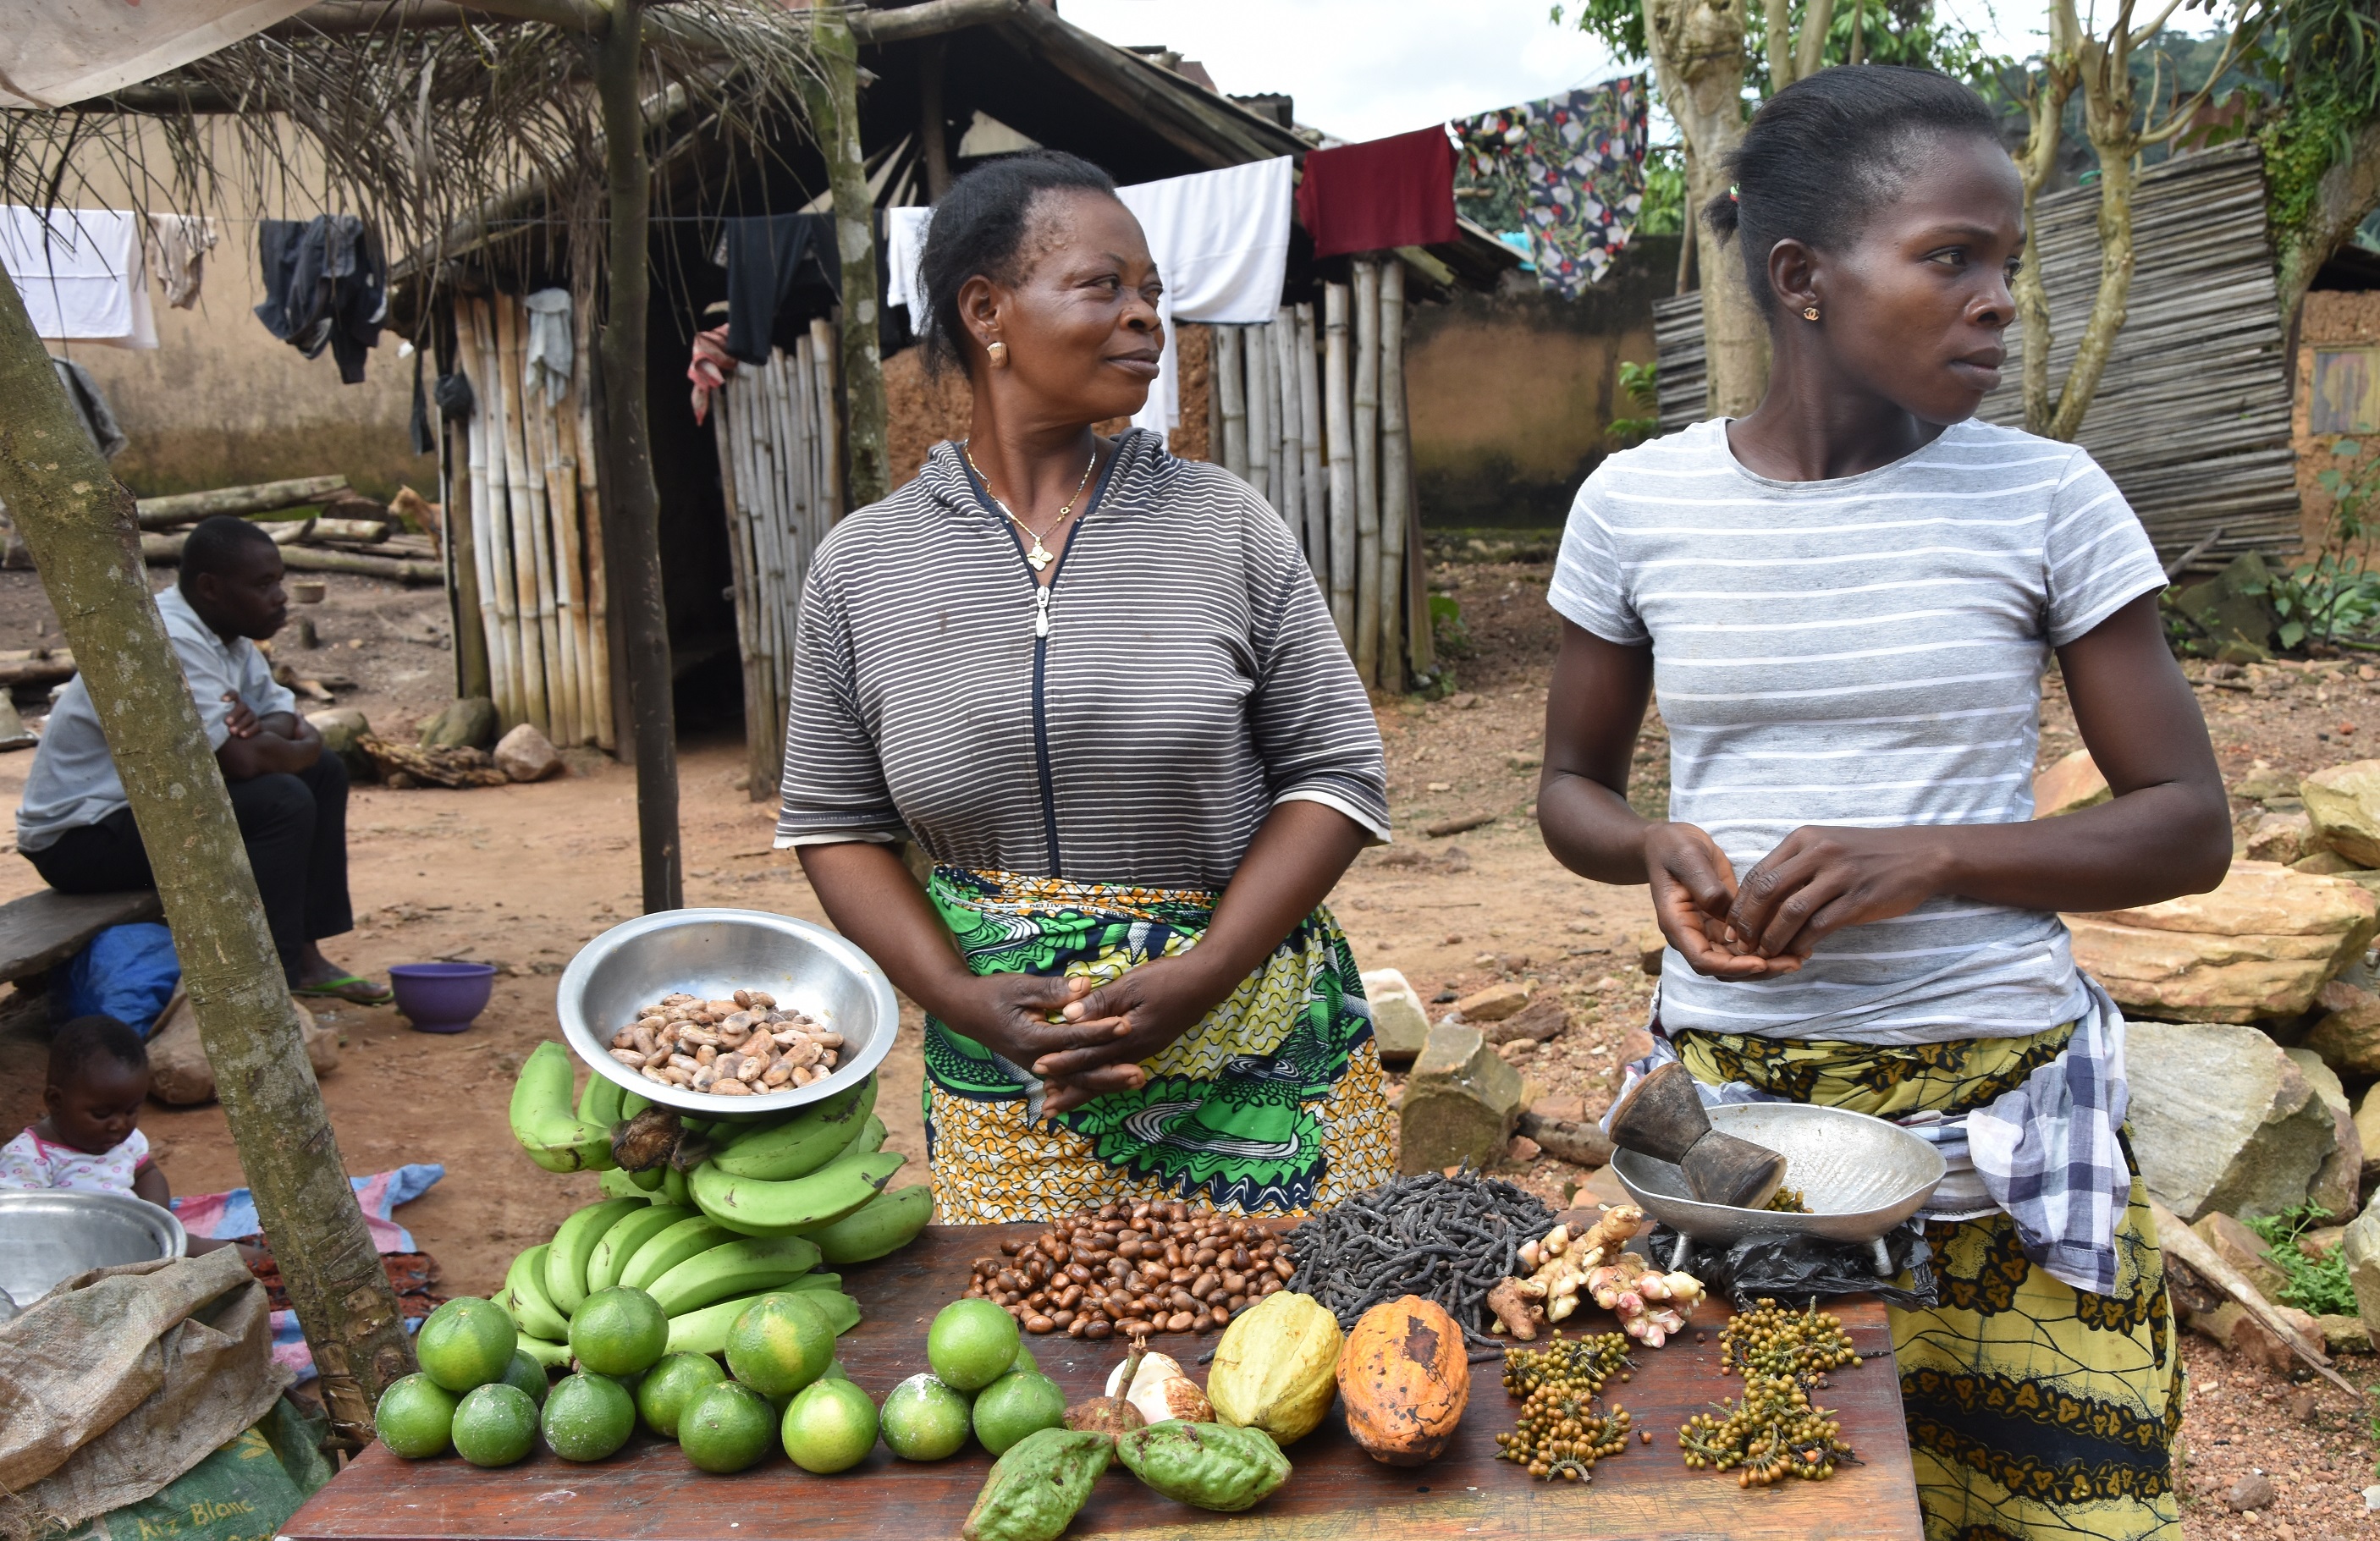 A marketing stall with forest products and fruits in Kpalimé/Togo. Photo: Stella Marraccini, GIZ